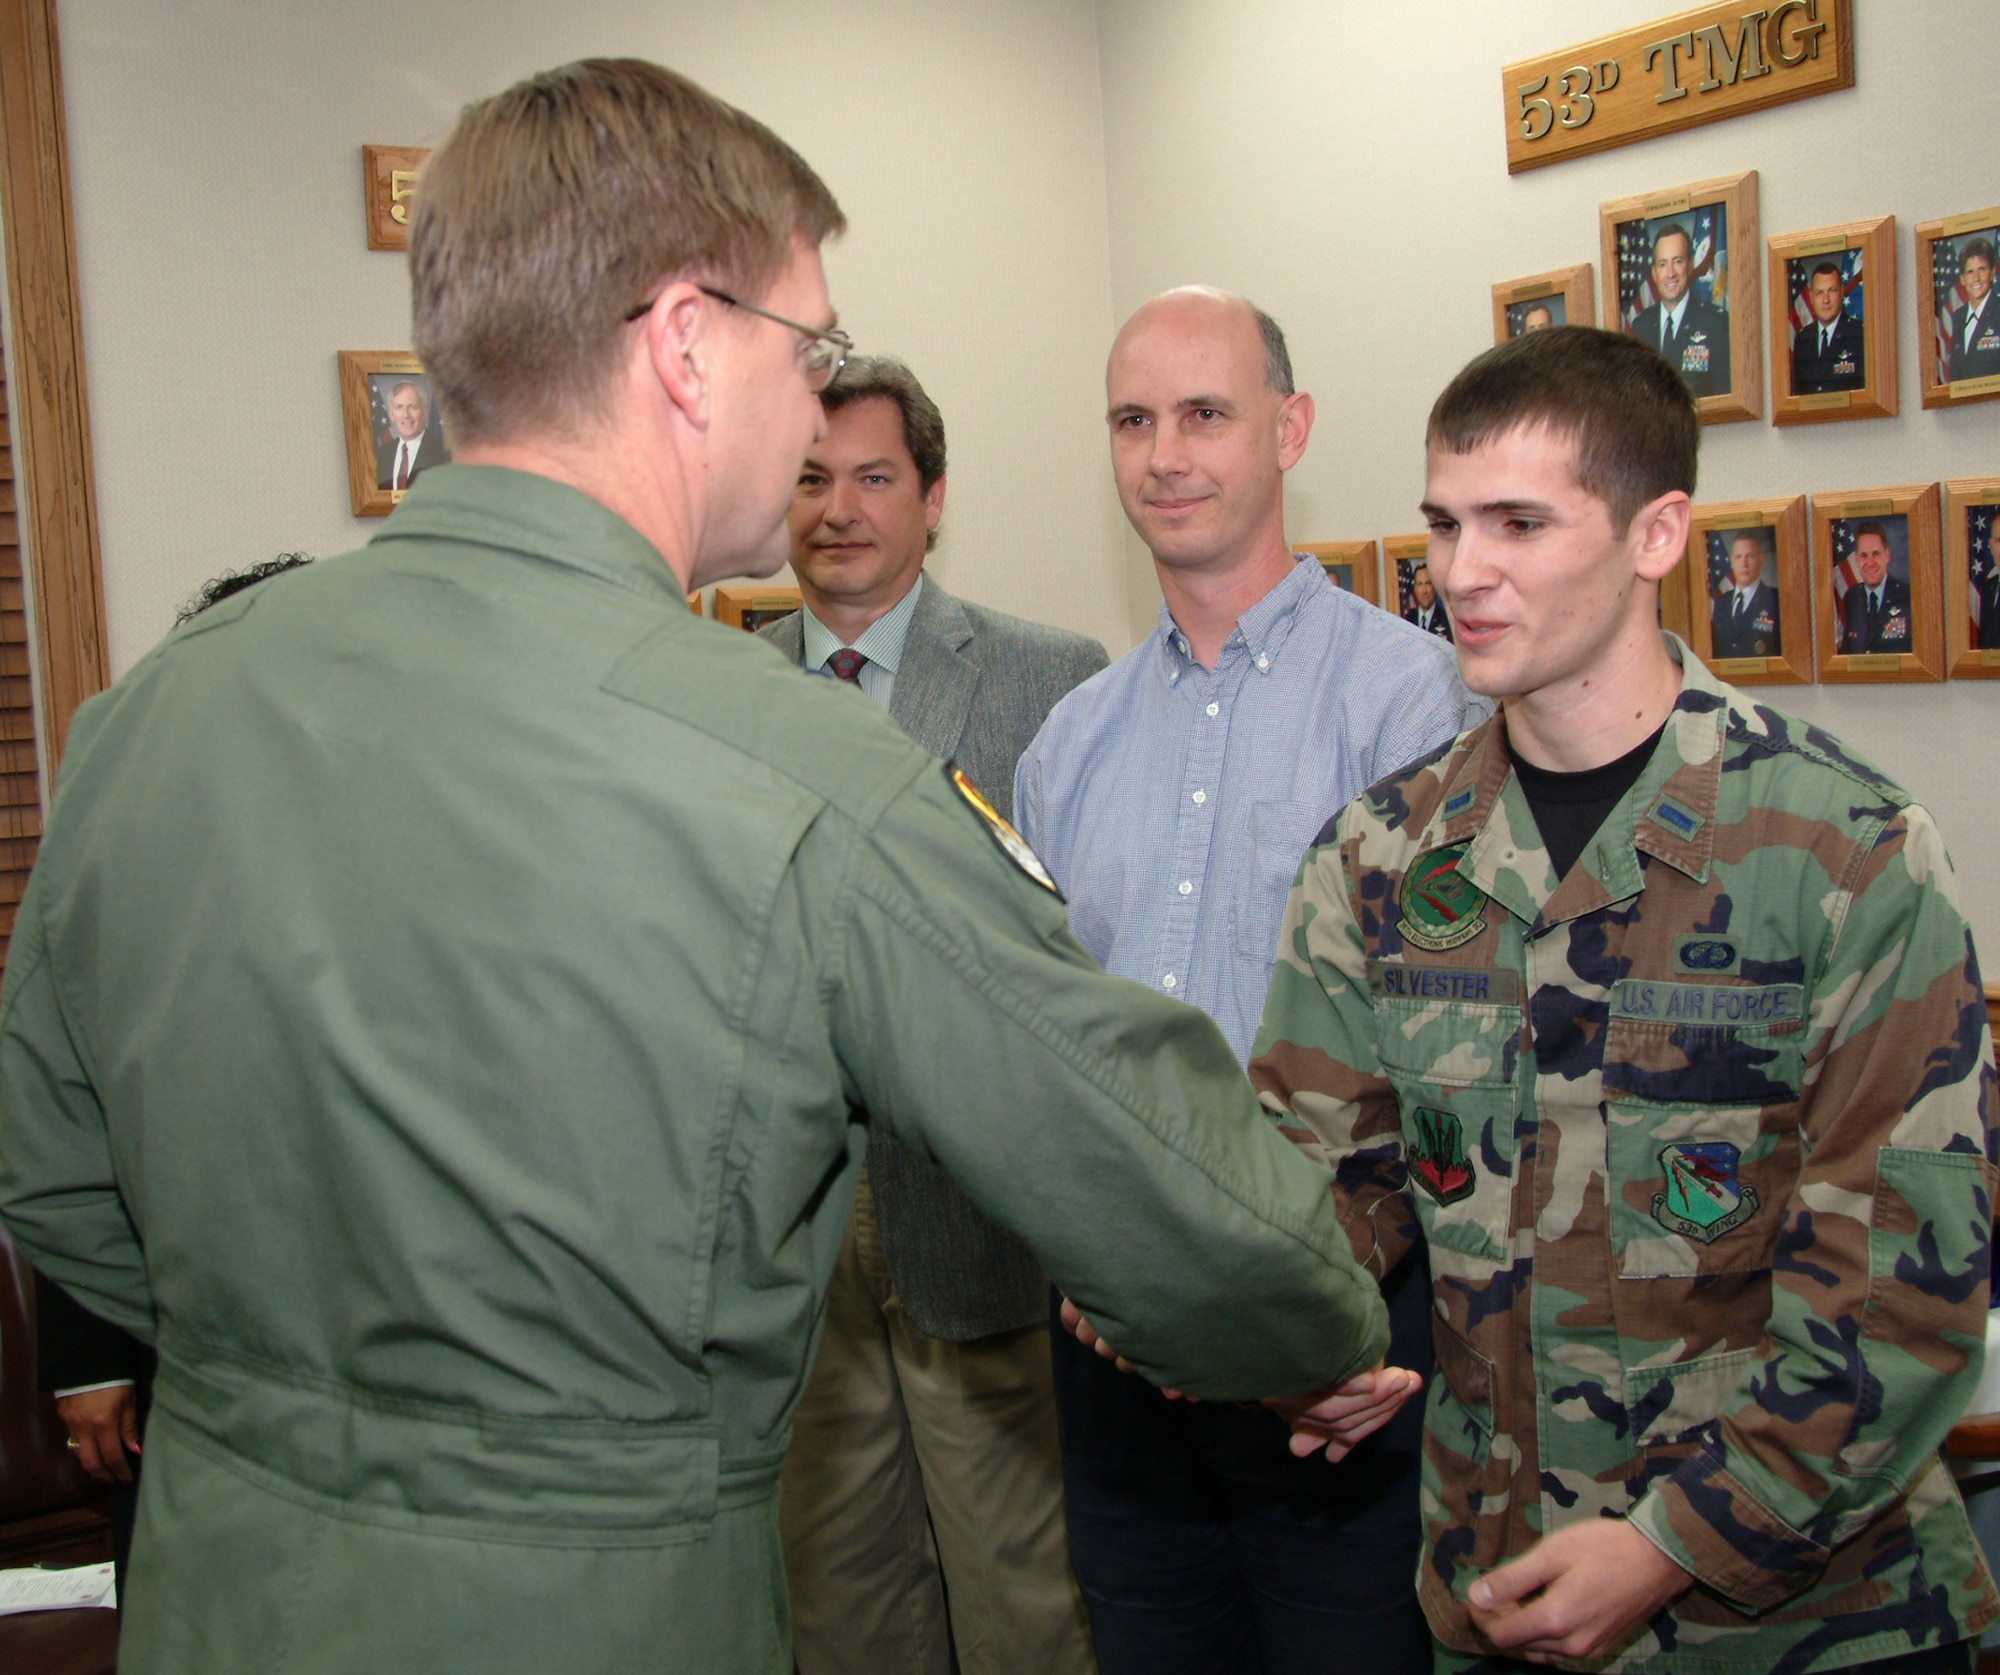 Brig. Gen. Stephen Hoog, United States Air Force Warfare Center commander, presents a coin to 1st Lt. Steven Slyvester, 36th Electronic Warfare Squadron, before the Electronic Warfare Group's briefing during the general's visit with the 53d Wing Feb. 21 at Eglin Air Force Base, Fla.  The lieutenant along with other members of the 36th EWS received coins by the general for winning various engineering awards.  U.S. Air Force photo by Staff Sgt. Samuel King Jr.